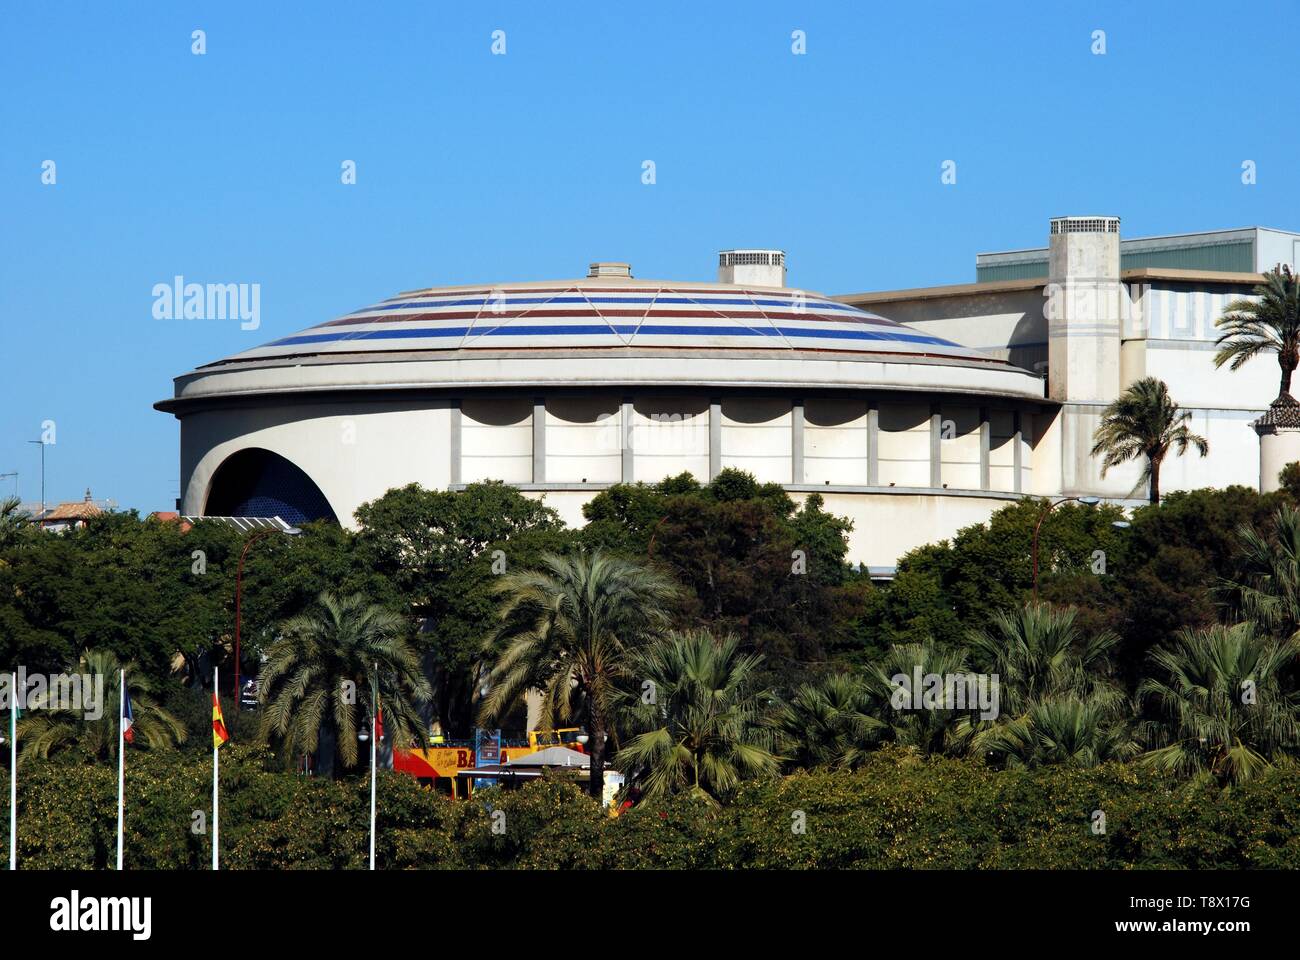 View of the Maestranza theatre with trees in the foreground, Seville, Seville Province, Andalusia, Spain, Europe. Stock Photo